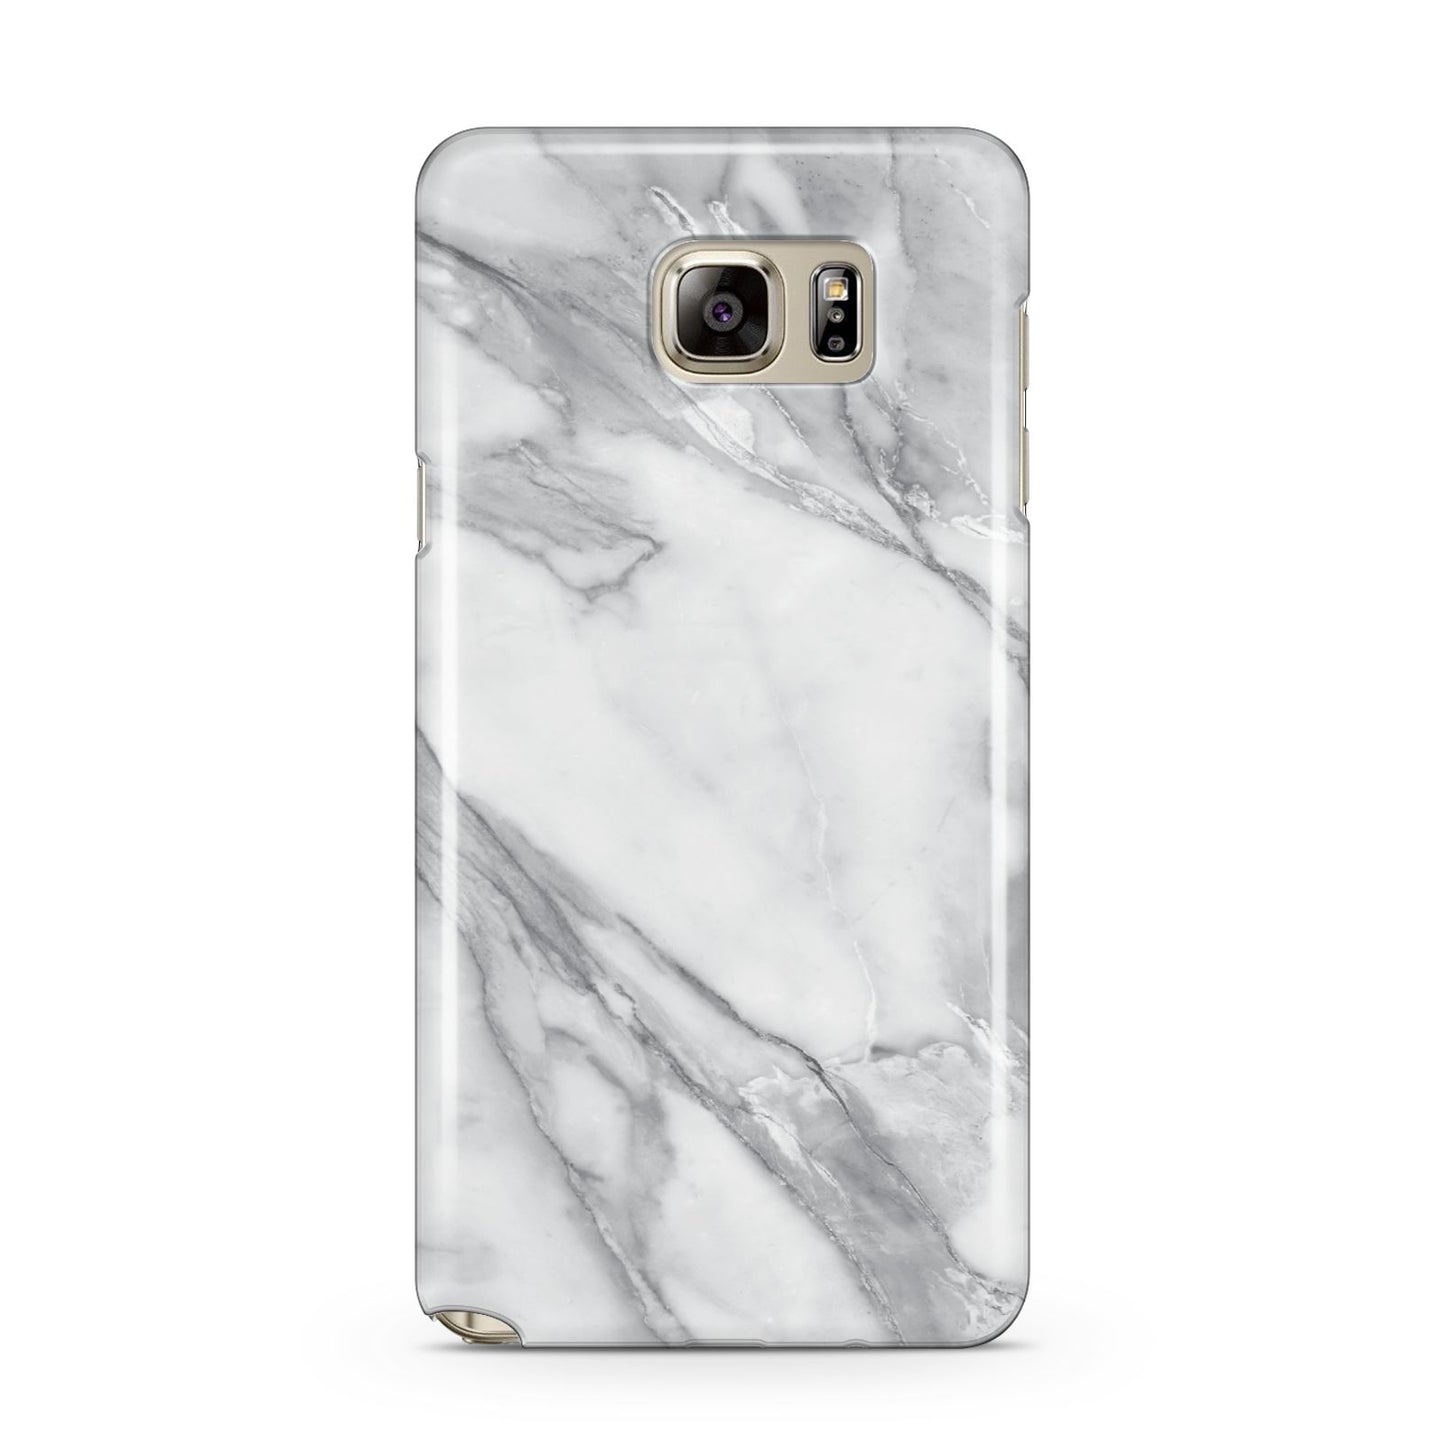 Faux Marble Effect White Grey Samsung Galaxy Note 5 Case